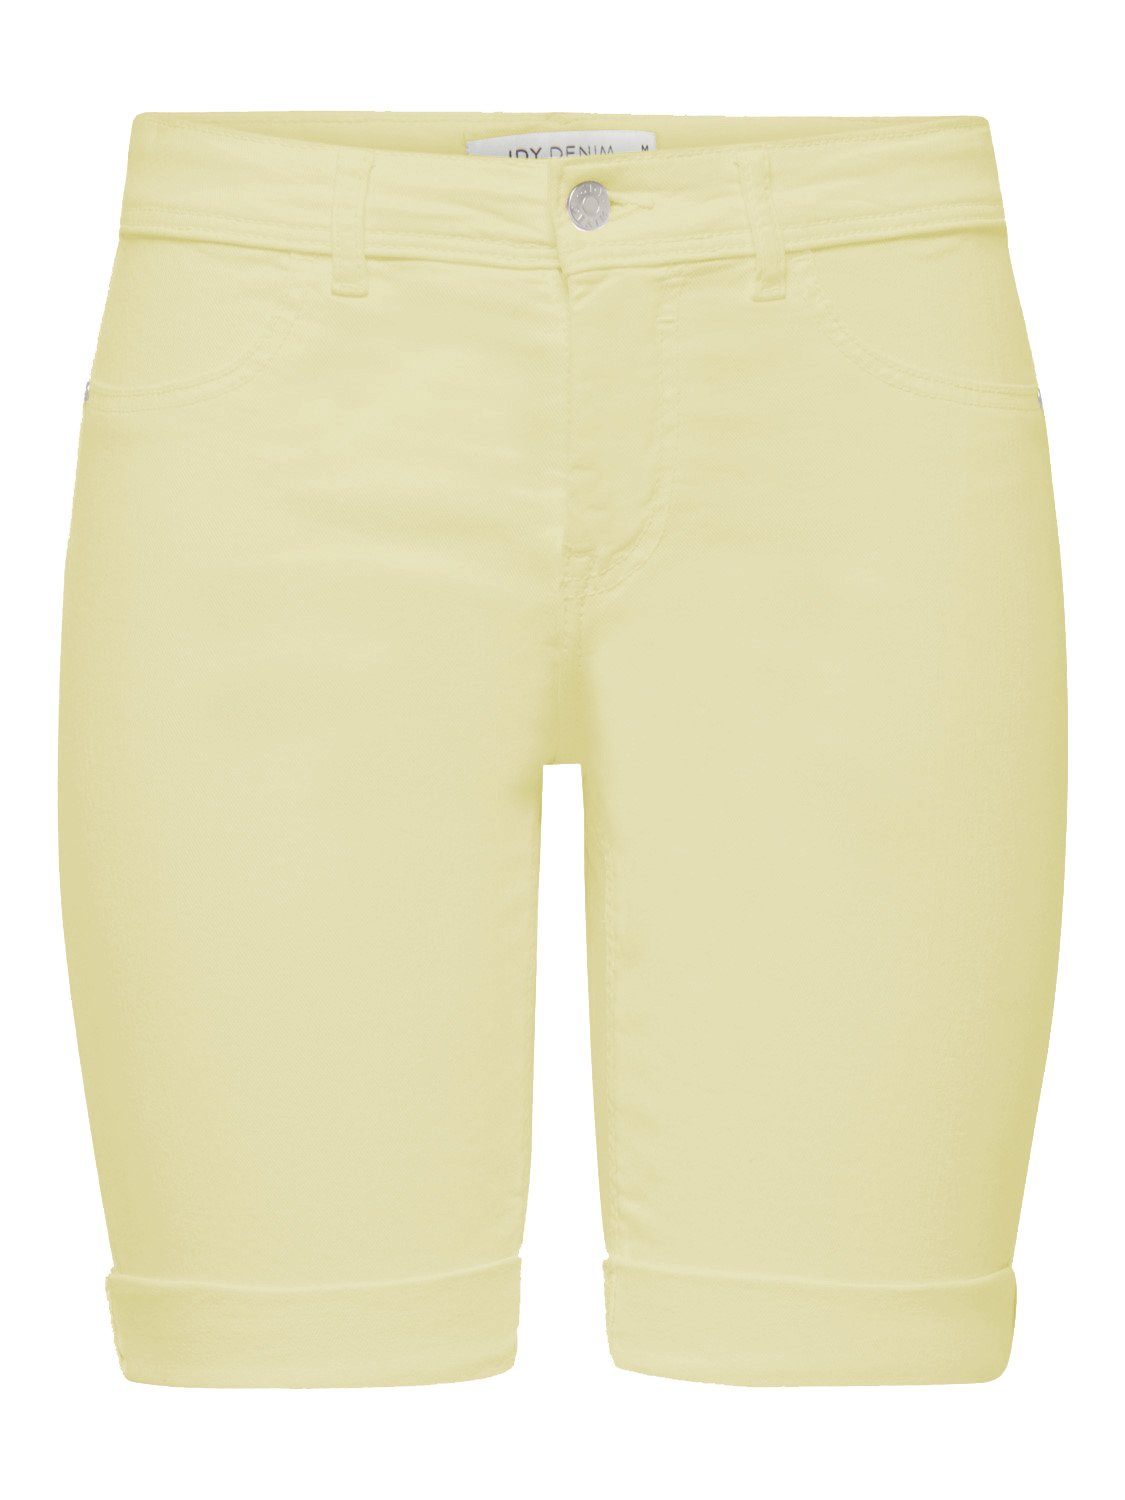 JACQUELINE de YONG Jeansshorts Jeans Shorts Kurze Sommer Chino Pants (1-tlg) 2704 in Gelb